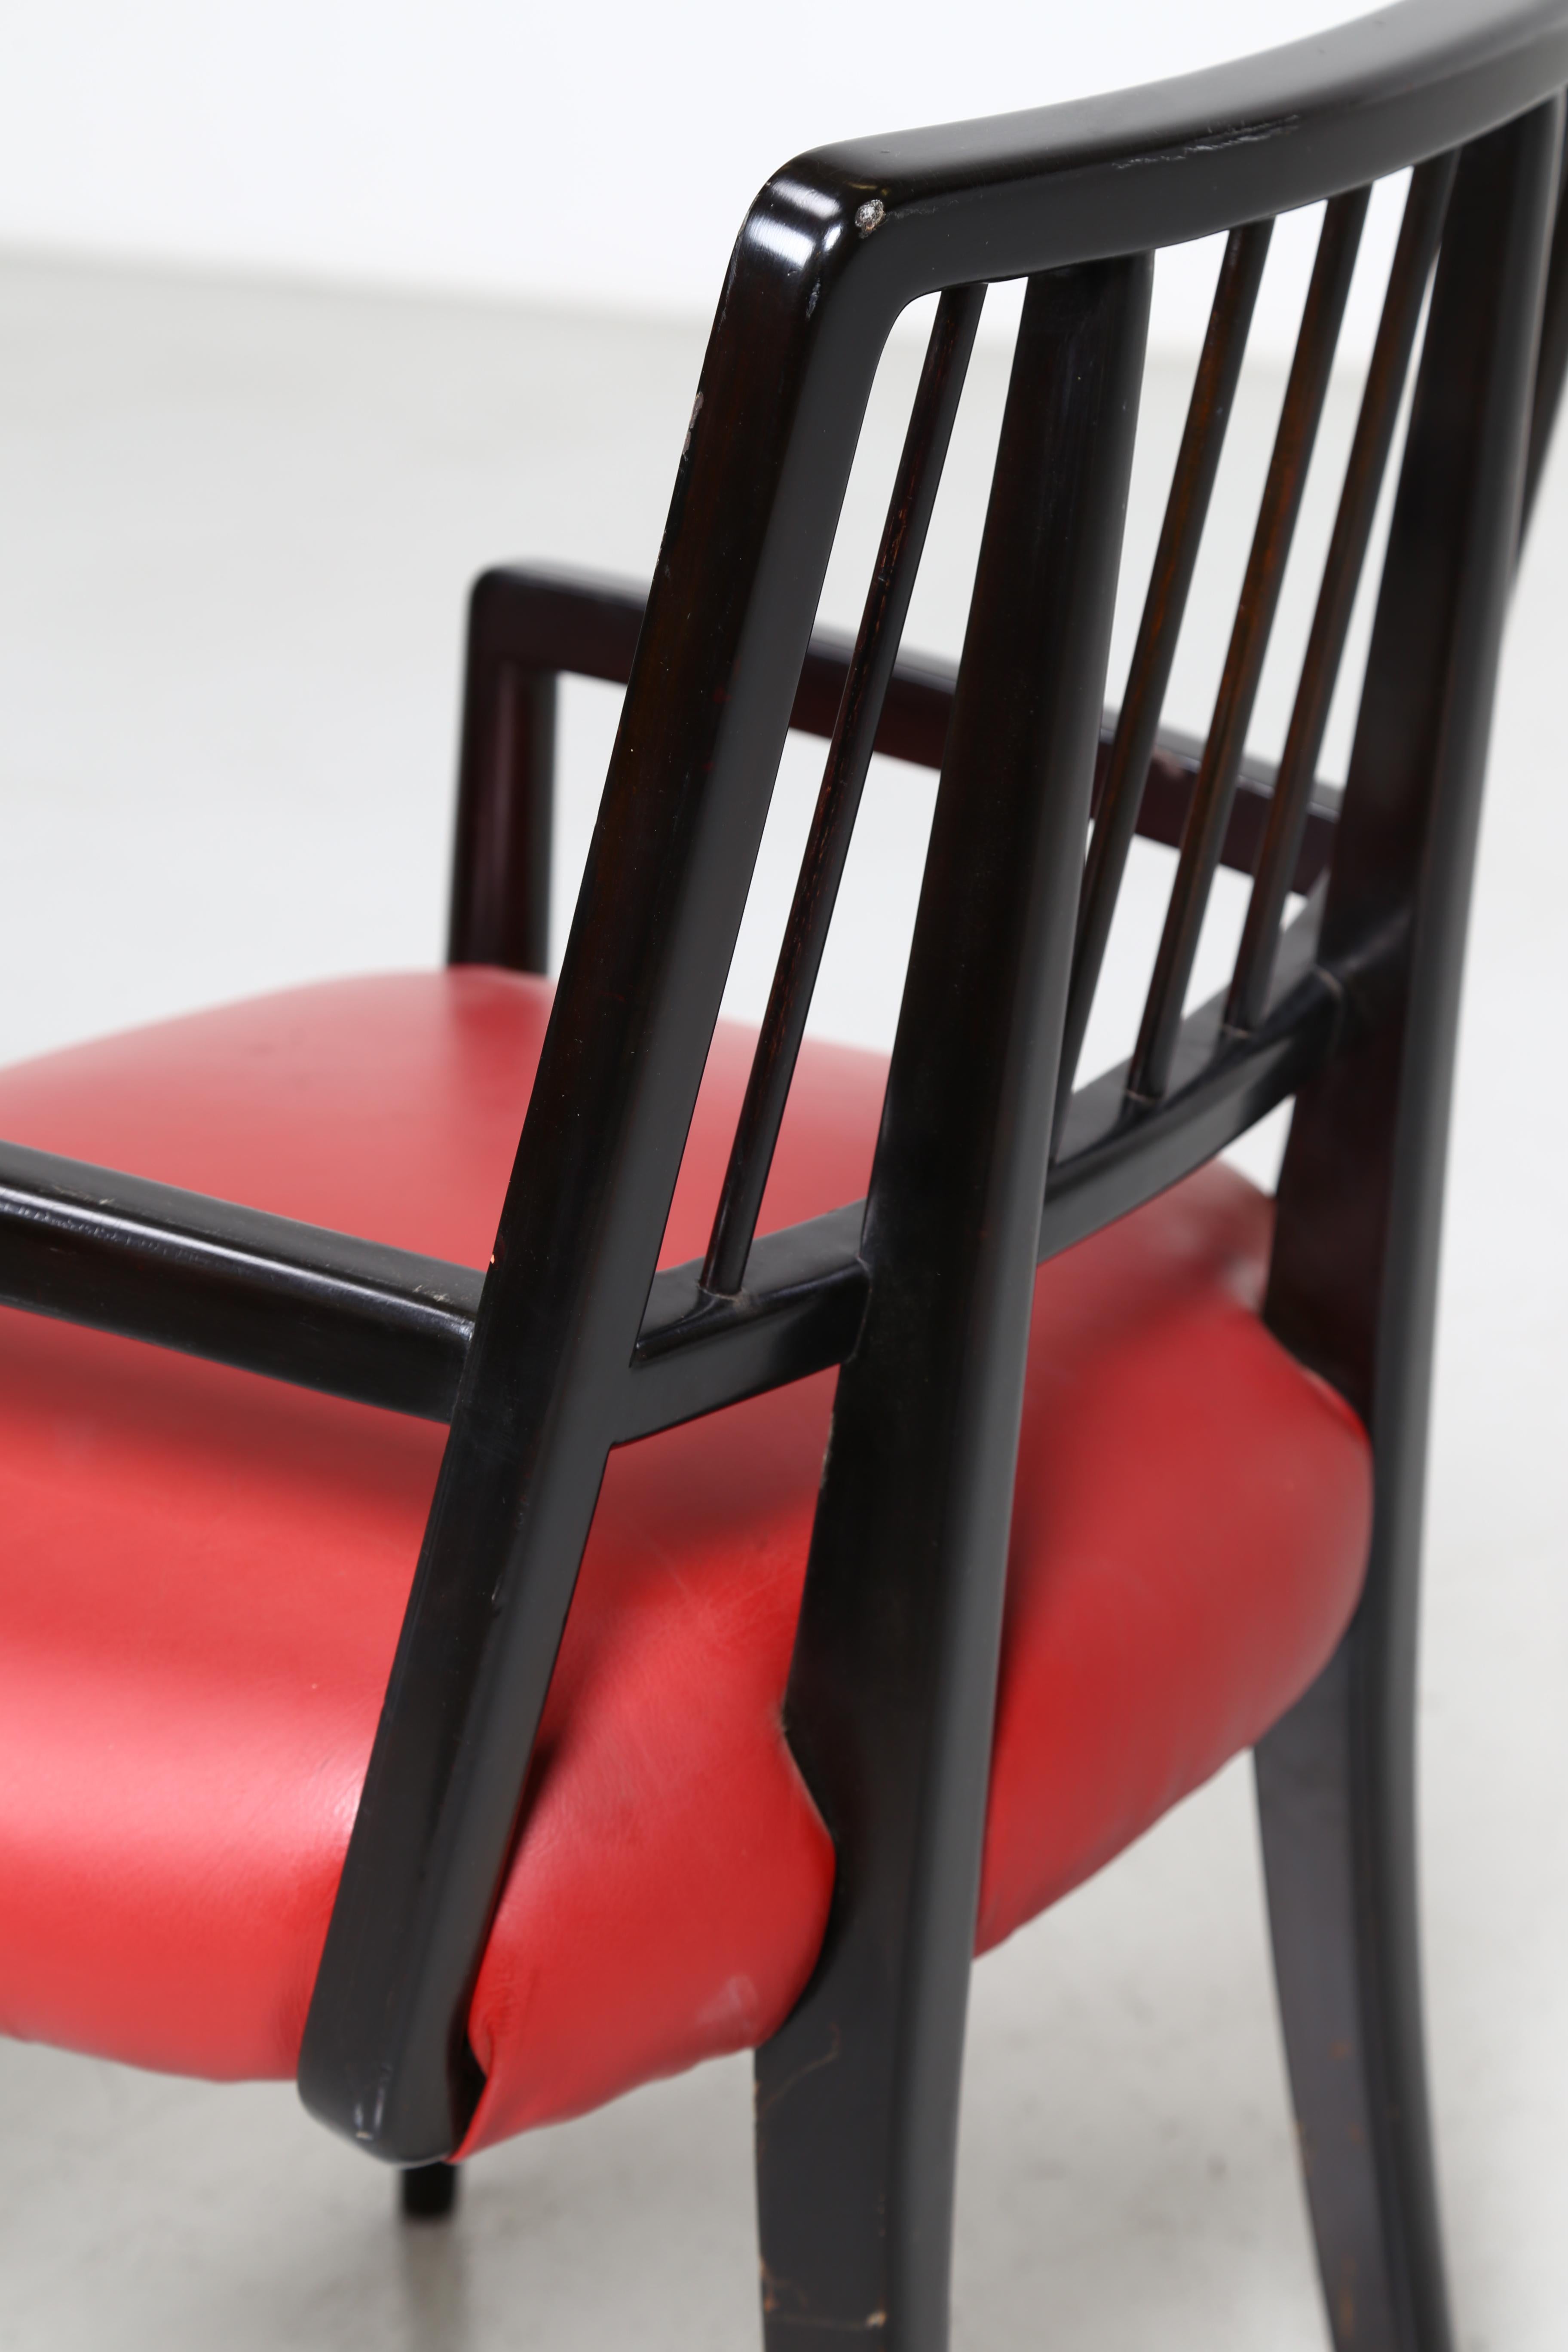 Mid-20th Century Paul Laszlo Set of Four Chairs in Black Lacquered Wood, 1950s For Sale